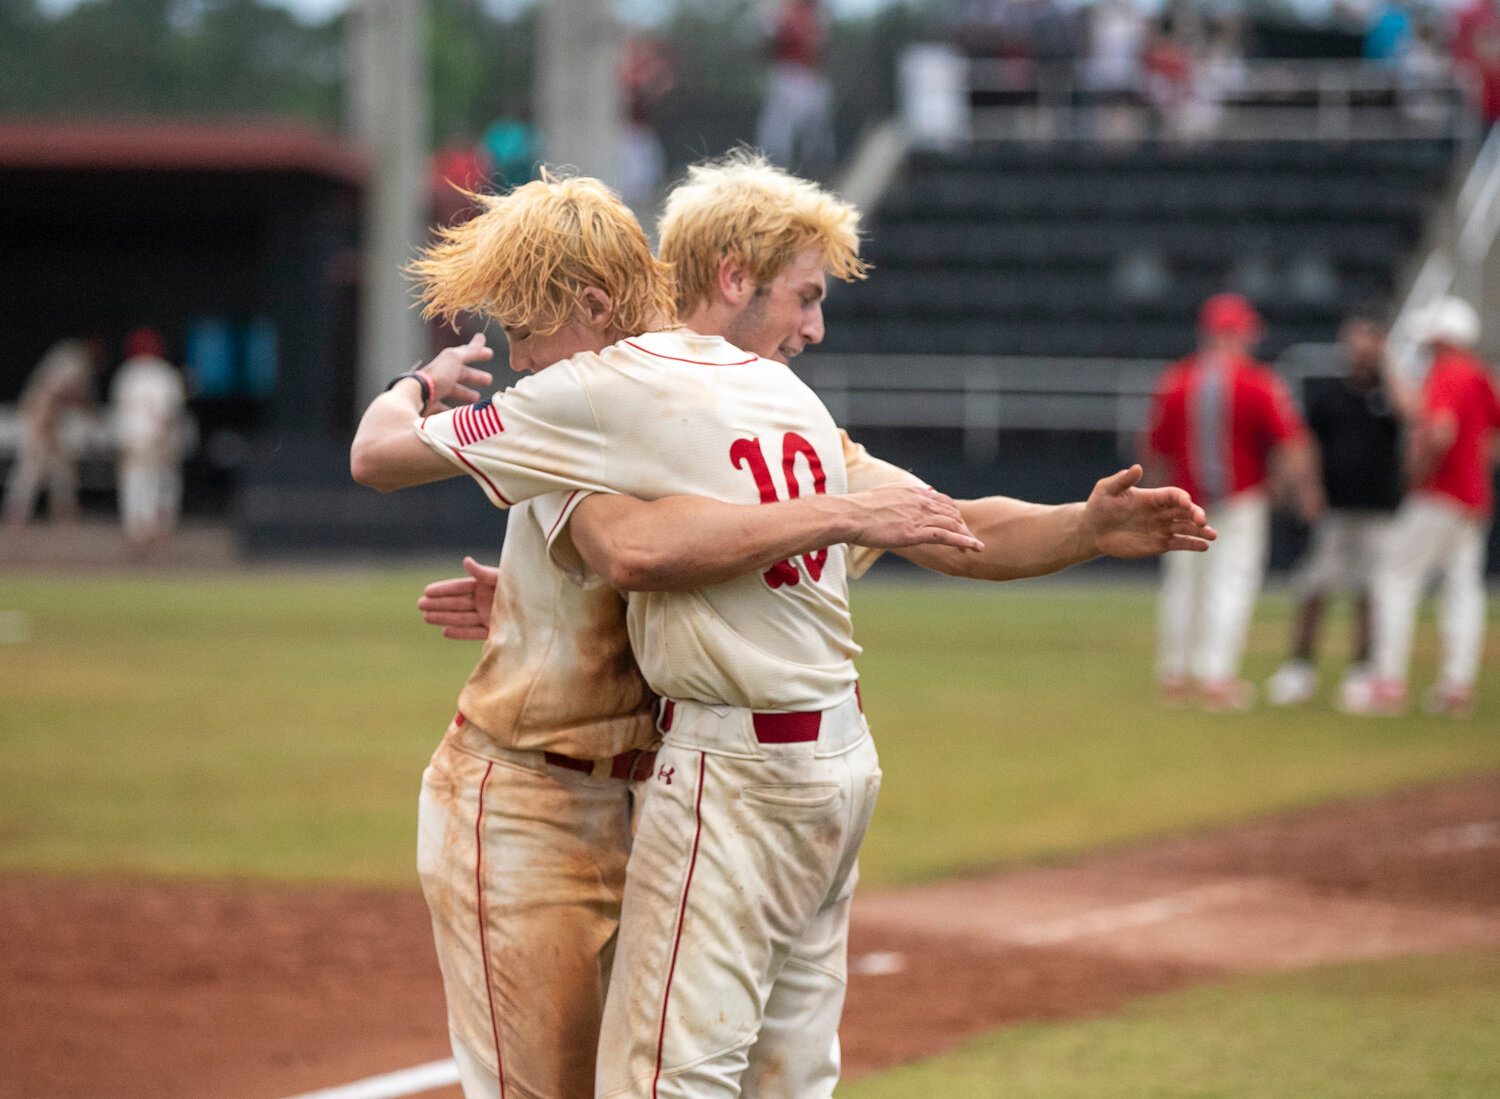 Brayden Cooper and Newton Gardner collide for a bearhug following the walk-off win that sent the Spanish Fort Toros to the state semifinals for the first time since 2015. Cooper hit in Gardner for the winning run in the eighth inning.